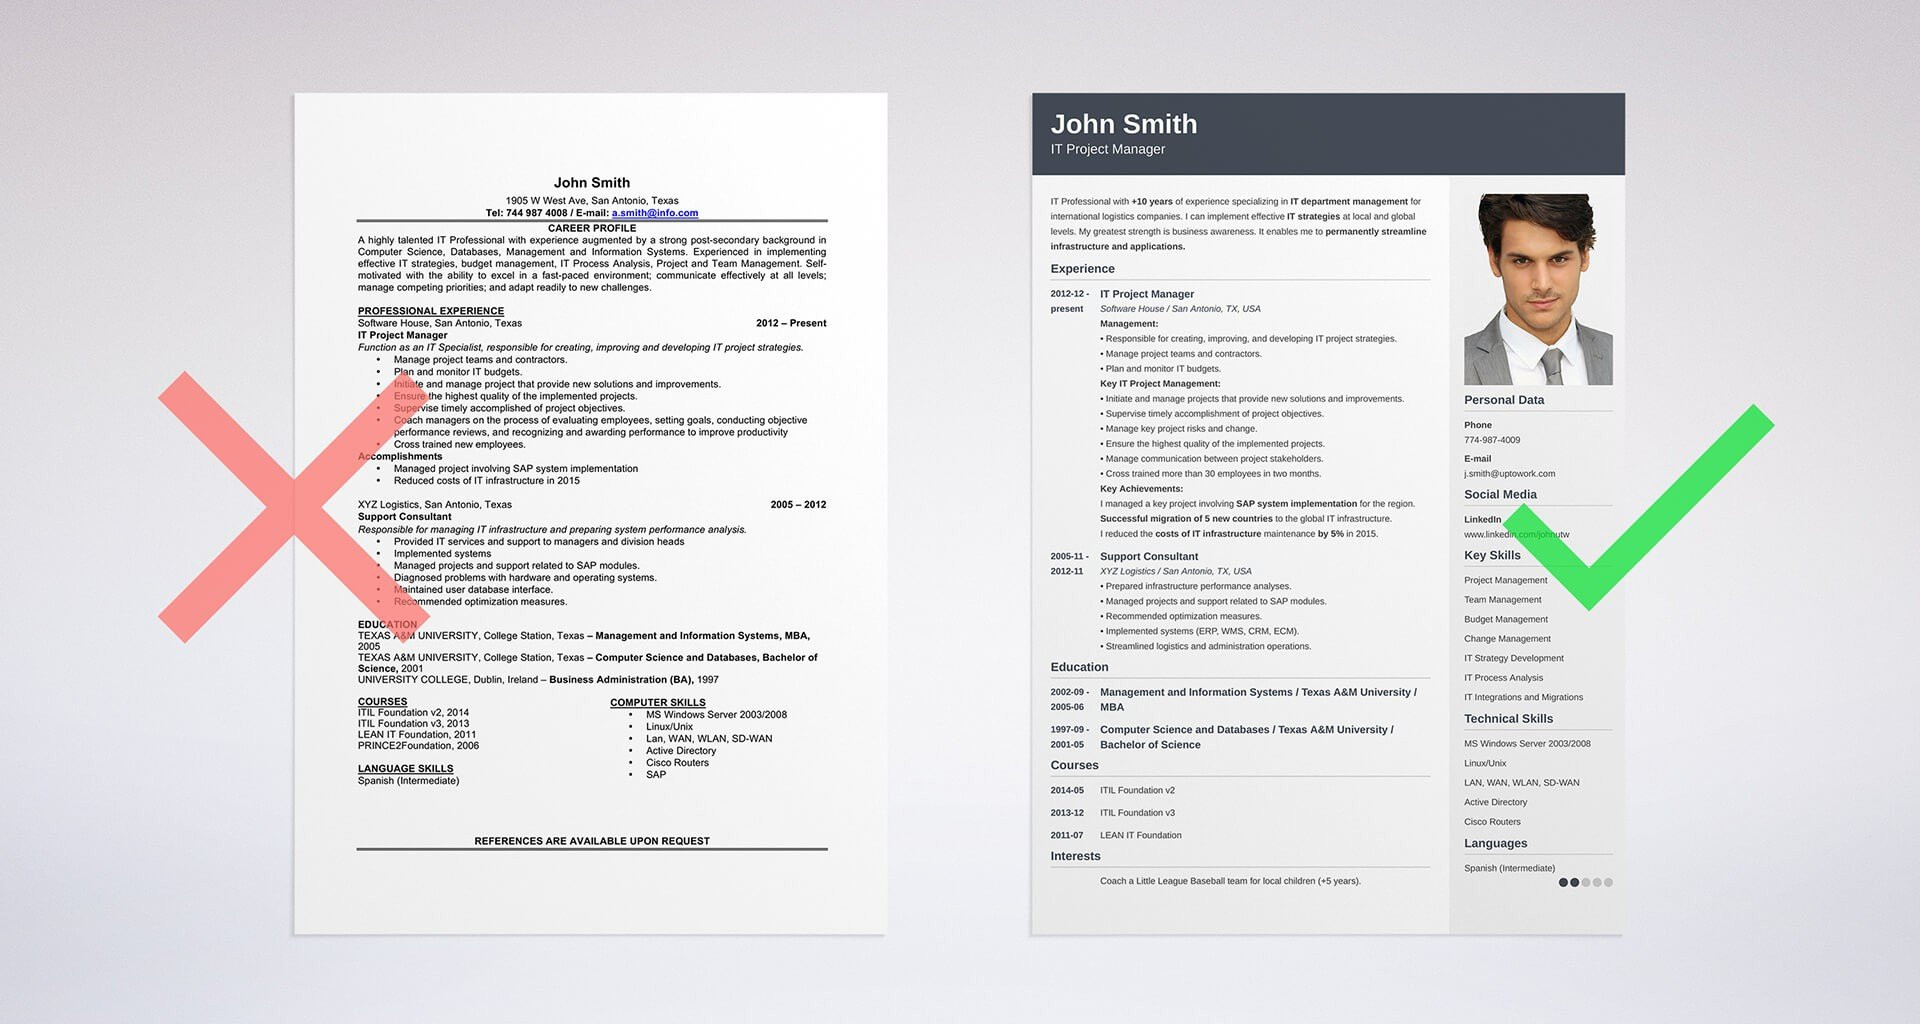 Sample area Of Interest In Resume List Of Hobbies and Interests for Resume & Cv [20 Examples]